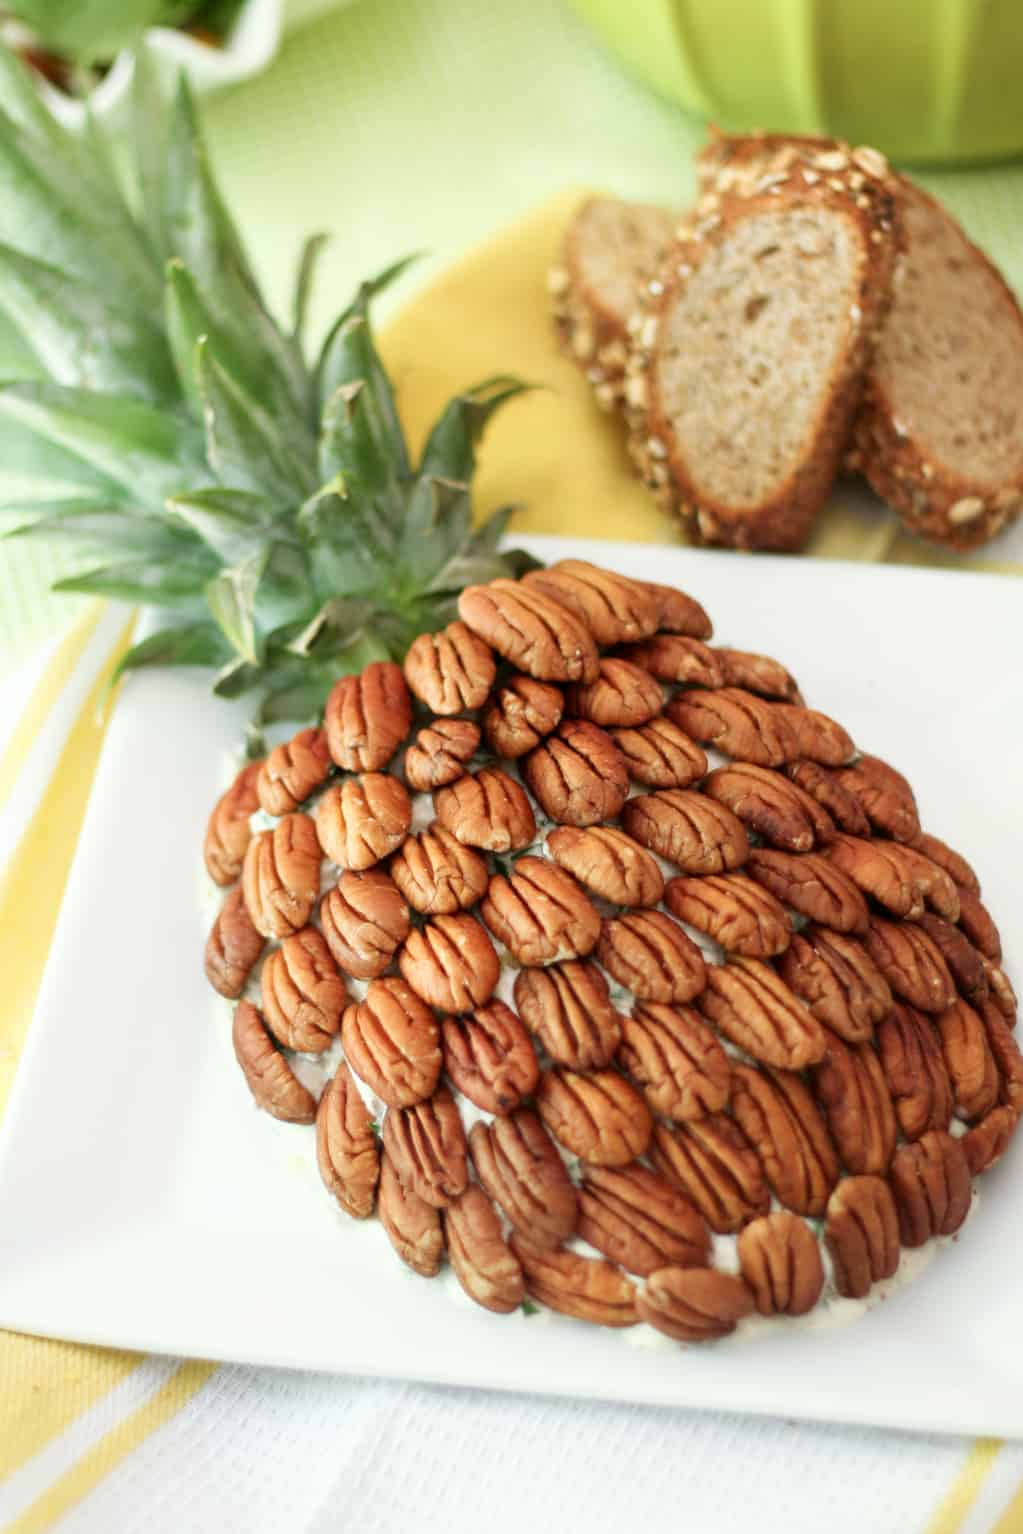 Pineapple Cream Cheese Spread | by Sonia! The Healthy Foodie